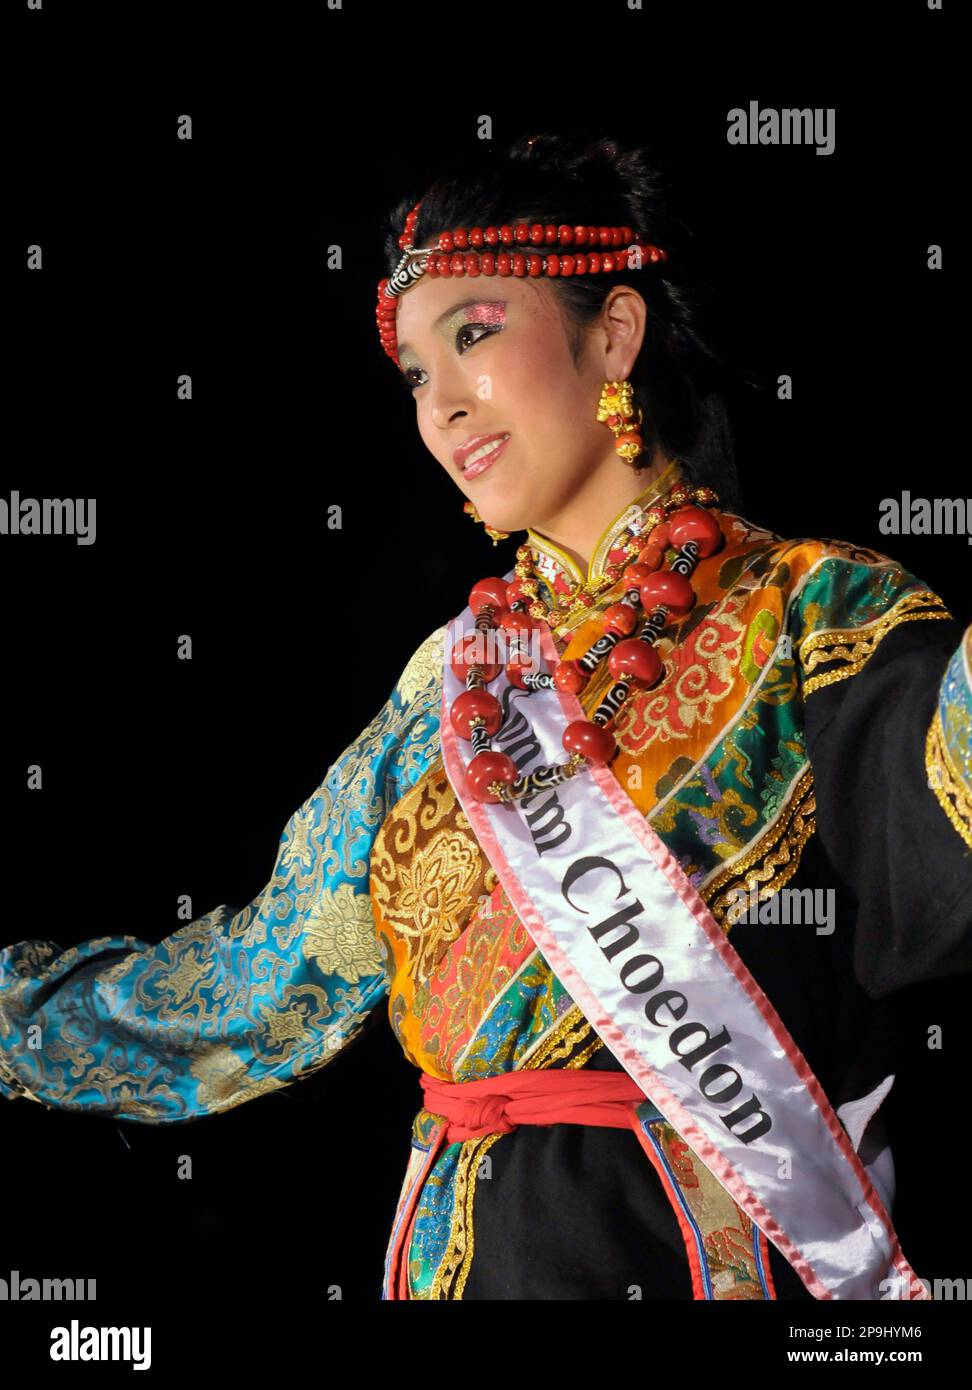 Sonam Choedon, 25, winner of the Miss Tibet 2008 beauty pageant, is seen in Dharmsala, India, Sunday, Oct. 12, 2008. Choedon, who was born in Tibet and came into exile in India in 2007, was one of the two contestants for this year's pageant. (AP Photo/Ashwini Bhatia) Stock Photo